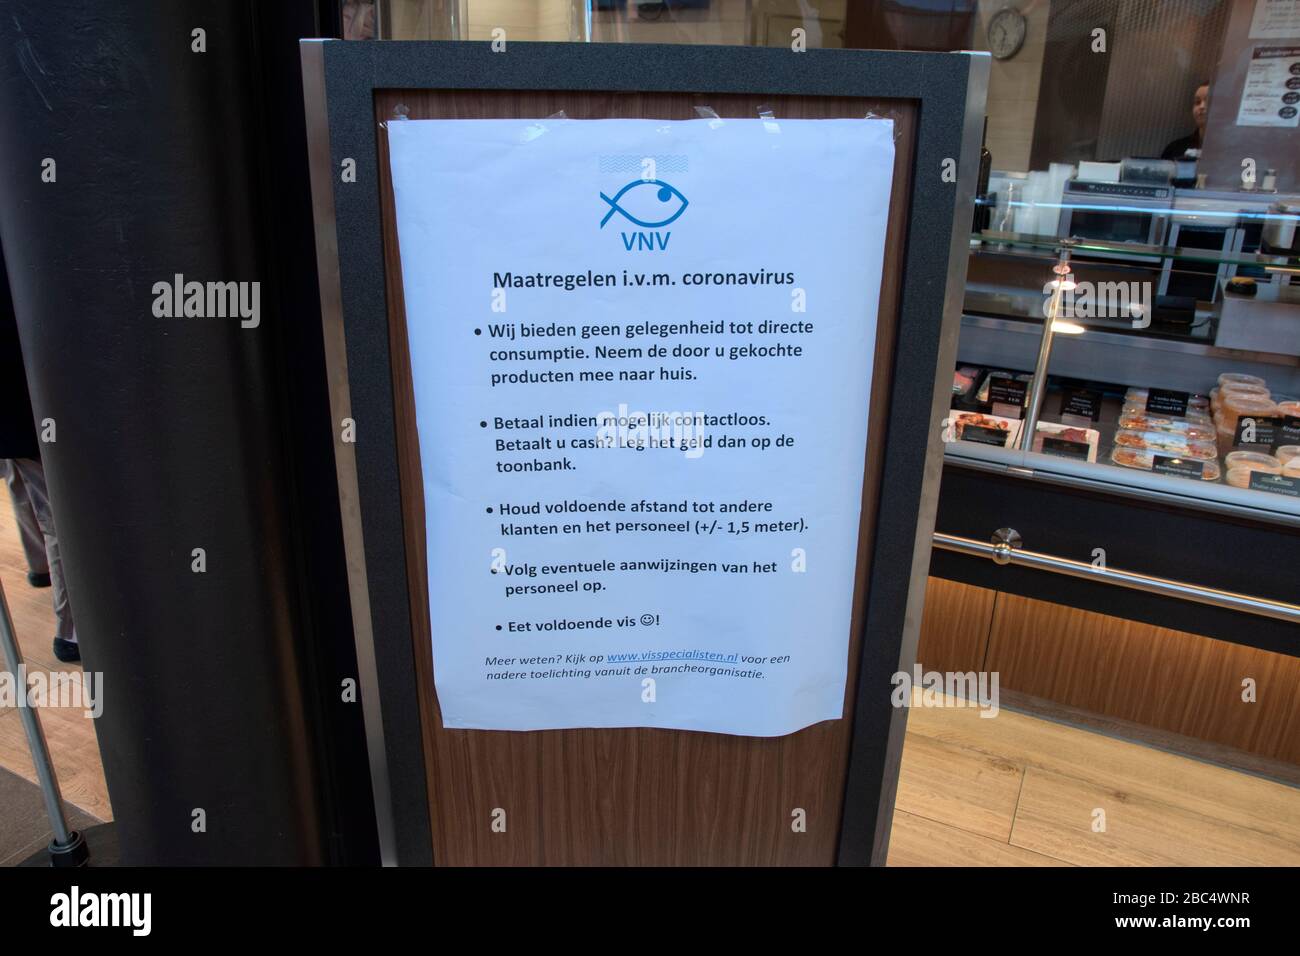 General Rules At The Wissen Fish Store During The Corona Virus Outbreak At Diemen The Netherlands 2020 Stock Photo